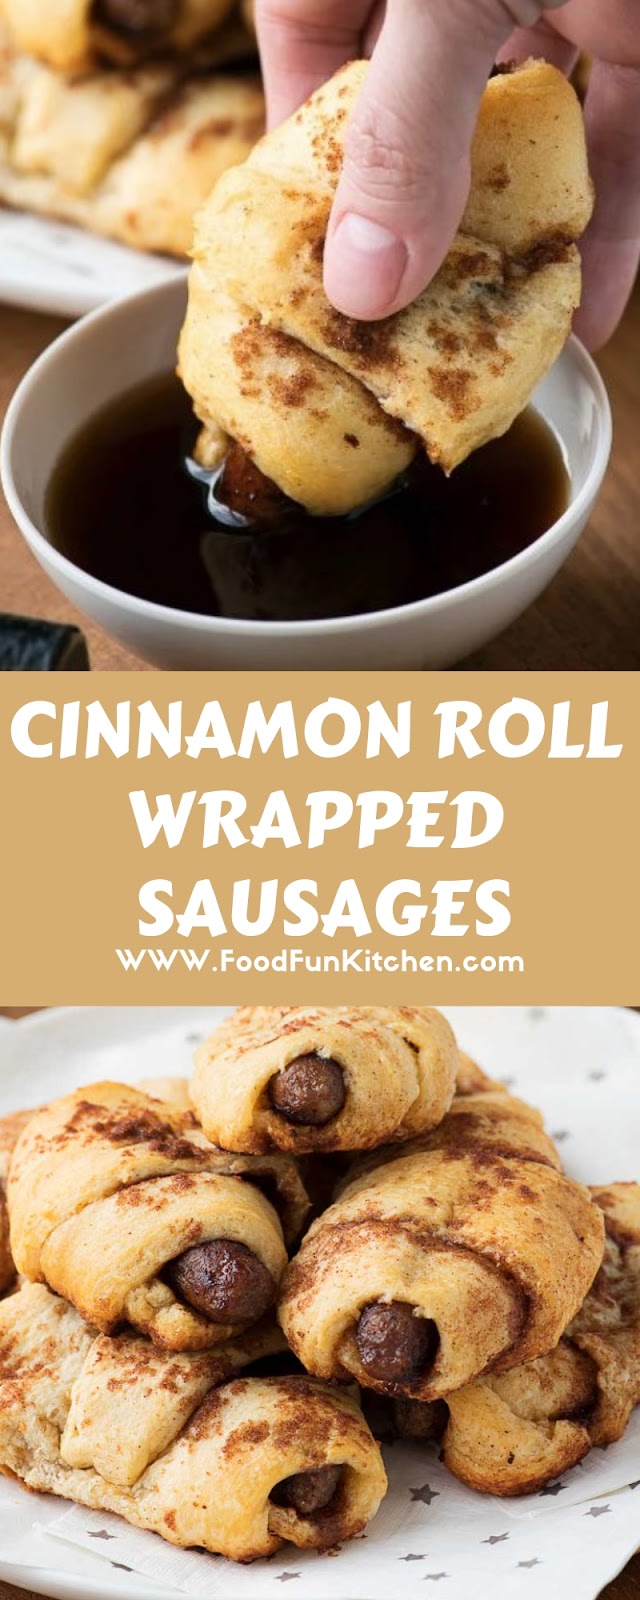 CINNAMON ROLL WRAPPED SAUSAGES